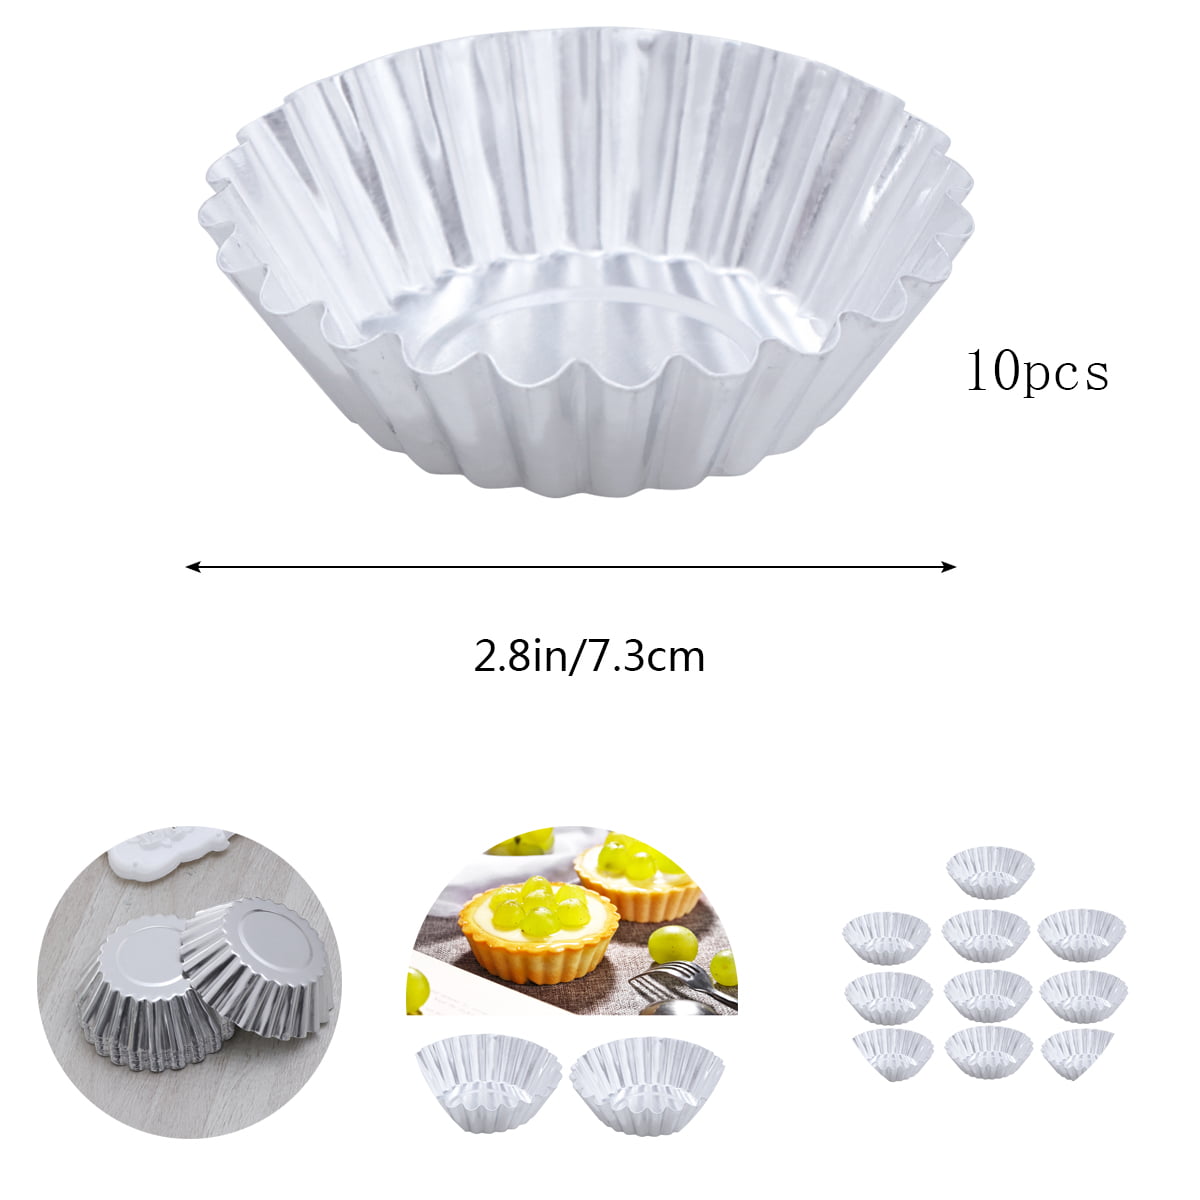 12 pc Harvest Colored Flowered shaped Silicone Baking cupcake Molds/Holder NEW 